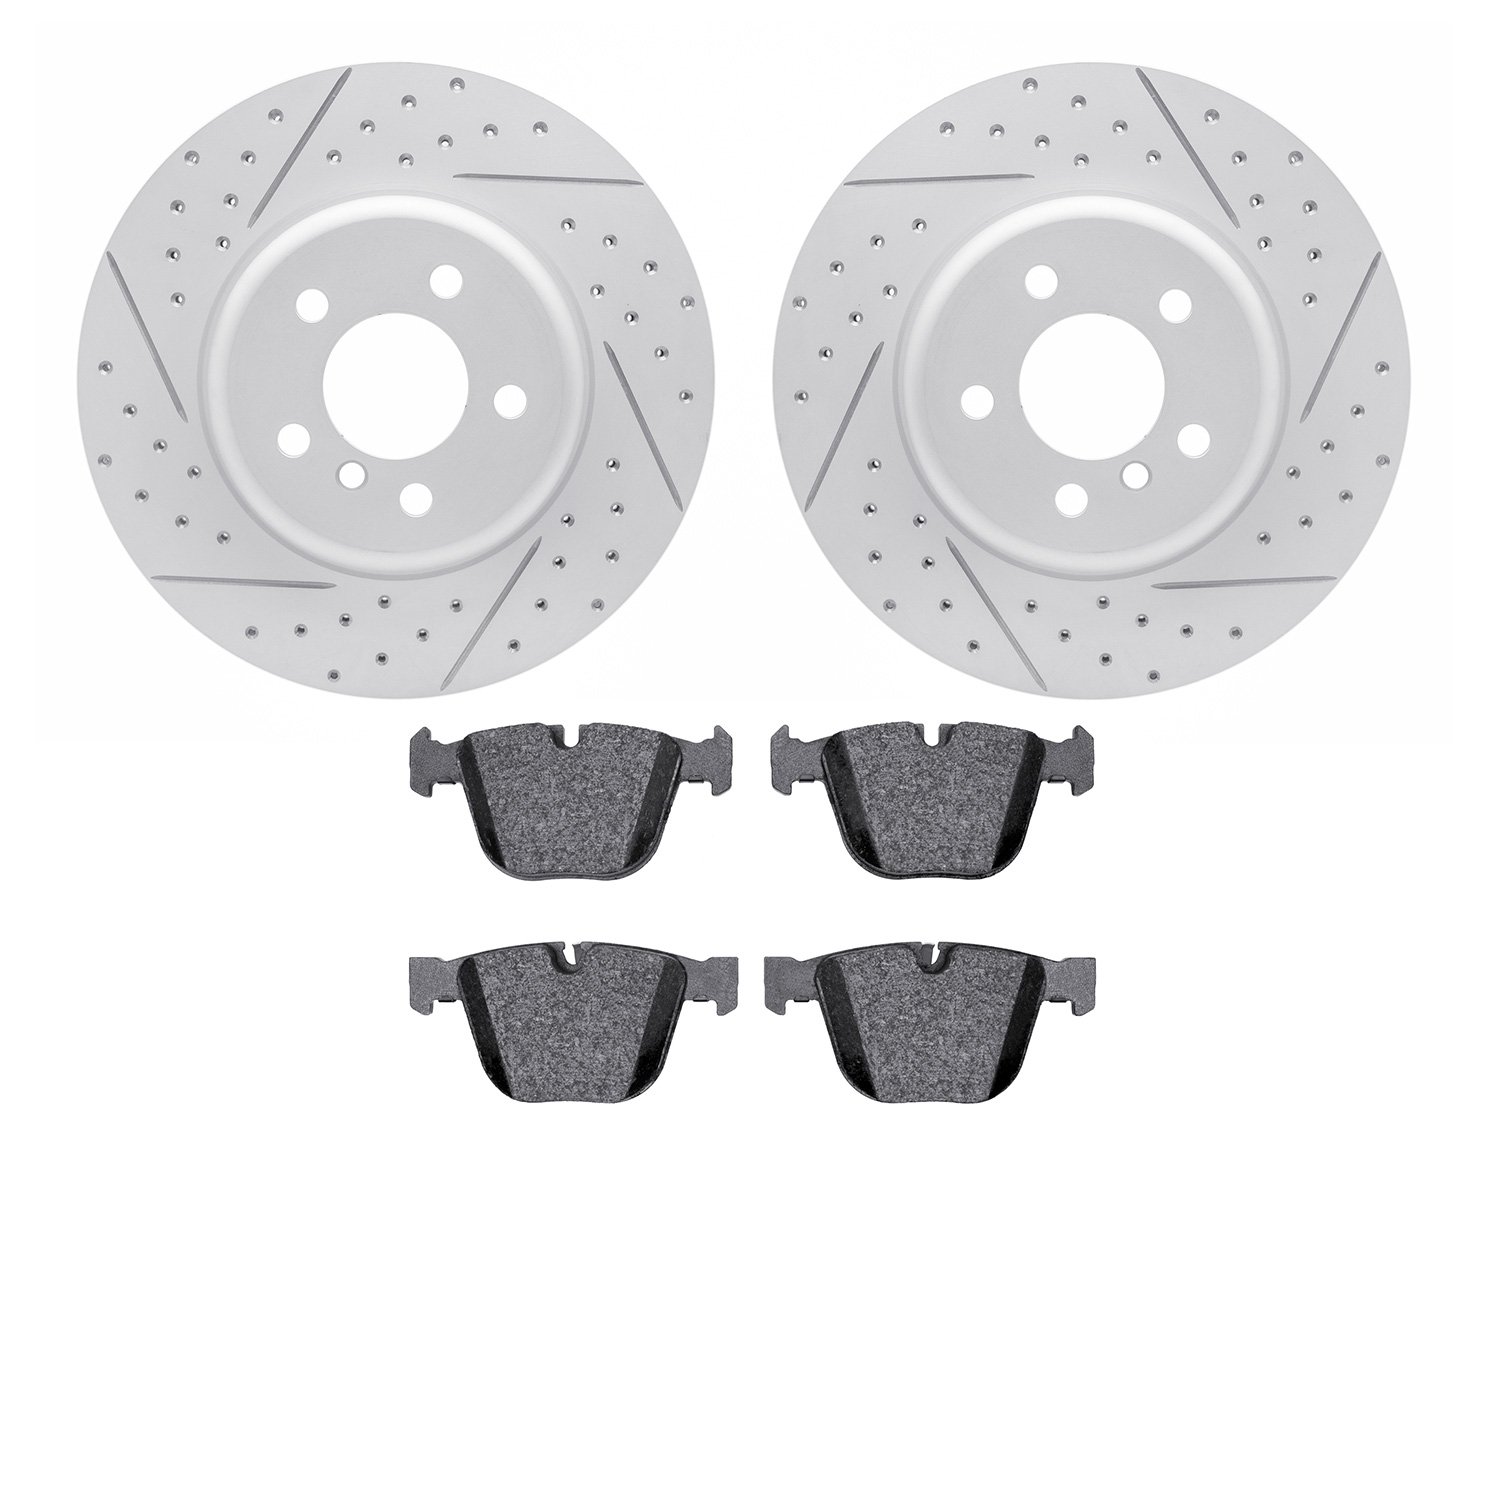 2502-31081 Geoperformance Drilled/Slotted Rotors w/5000 Advanced Brake Pads Kit, 2011-2015 BMW, Position: Rear